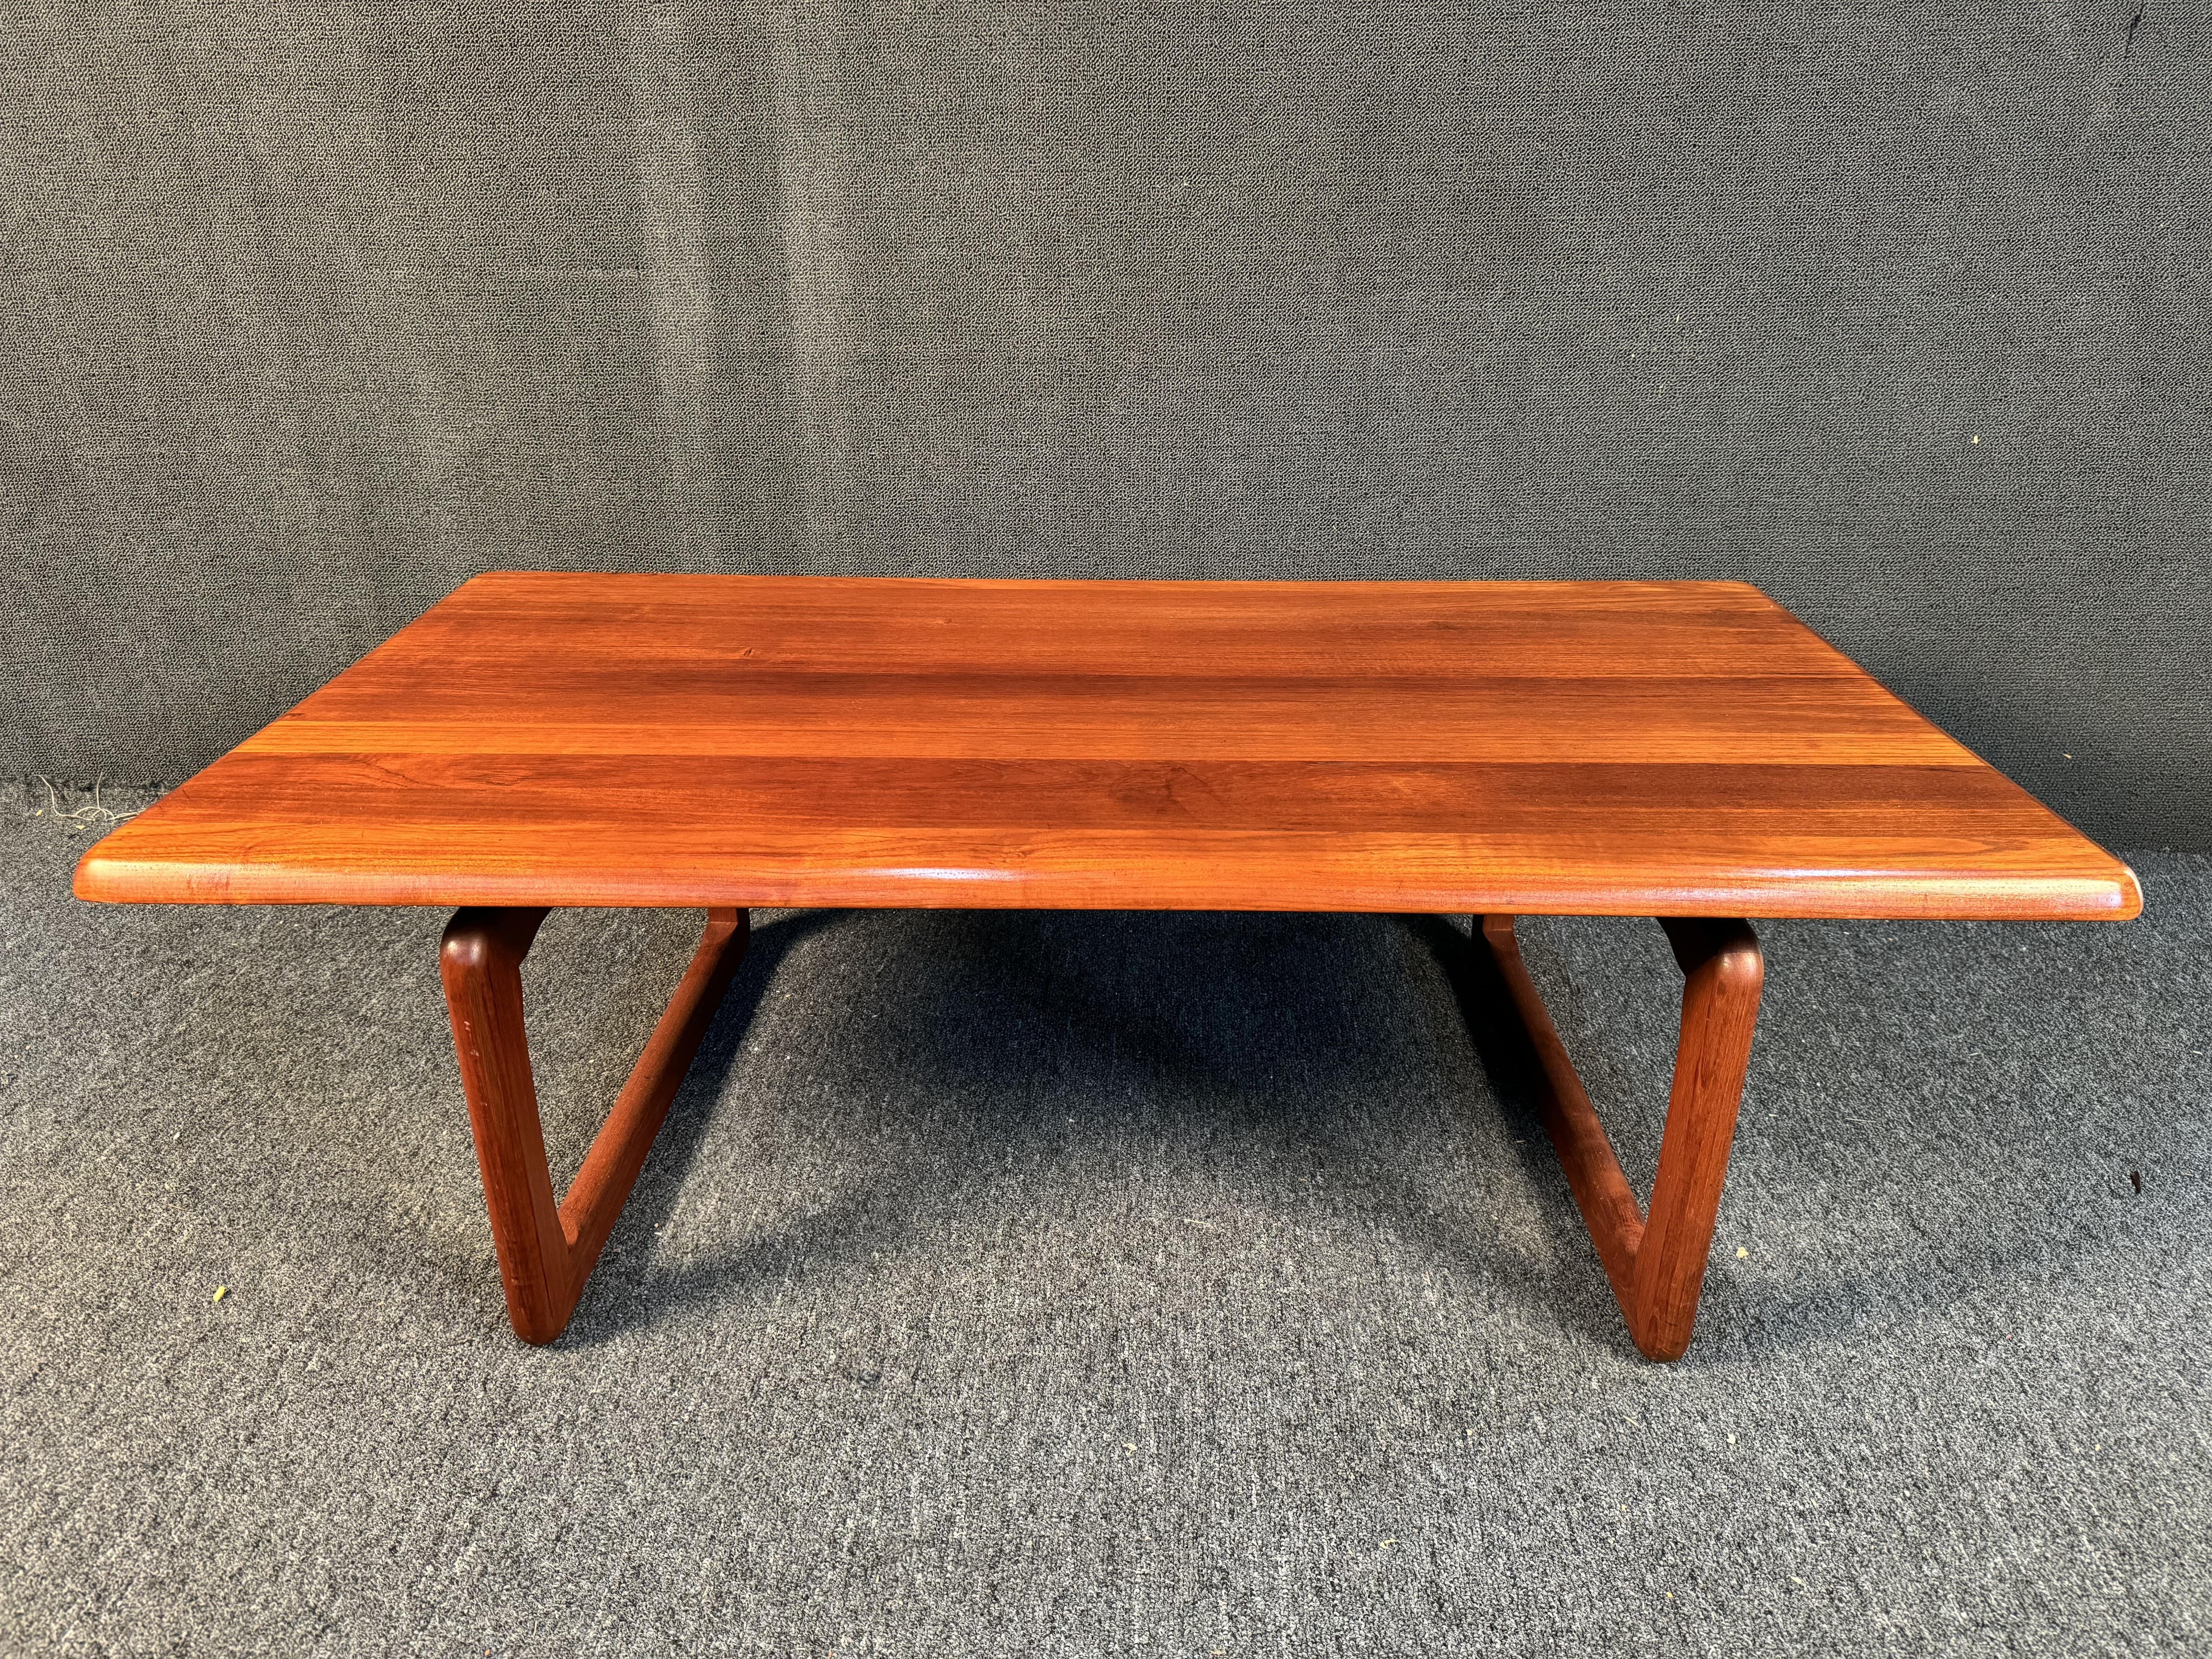 Stunning coffee table by Tarm Stole for OG Møbelfabrik. Featuring demi bullnosed edges and a gorgeous teak finish. This vintage danish piece is a perfect addition to any MCM styled living space, Please confirm location with dealer (NY or NJ)